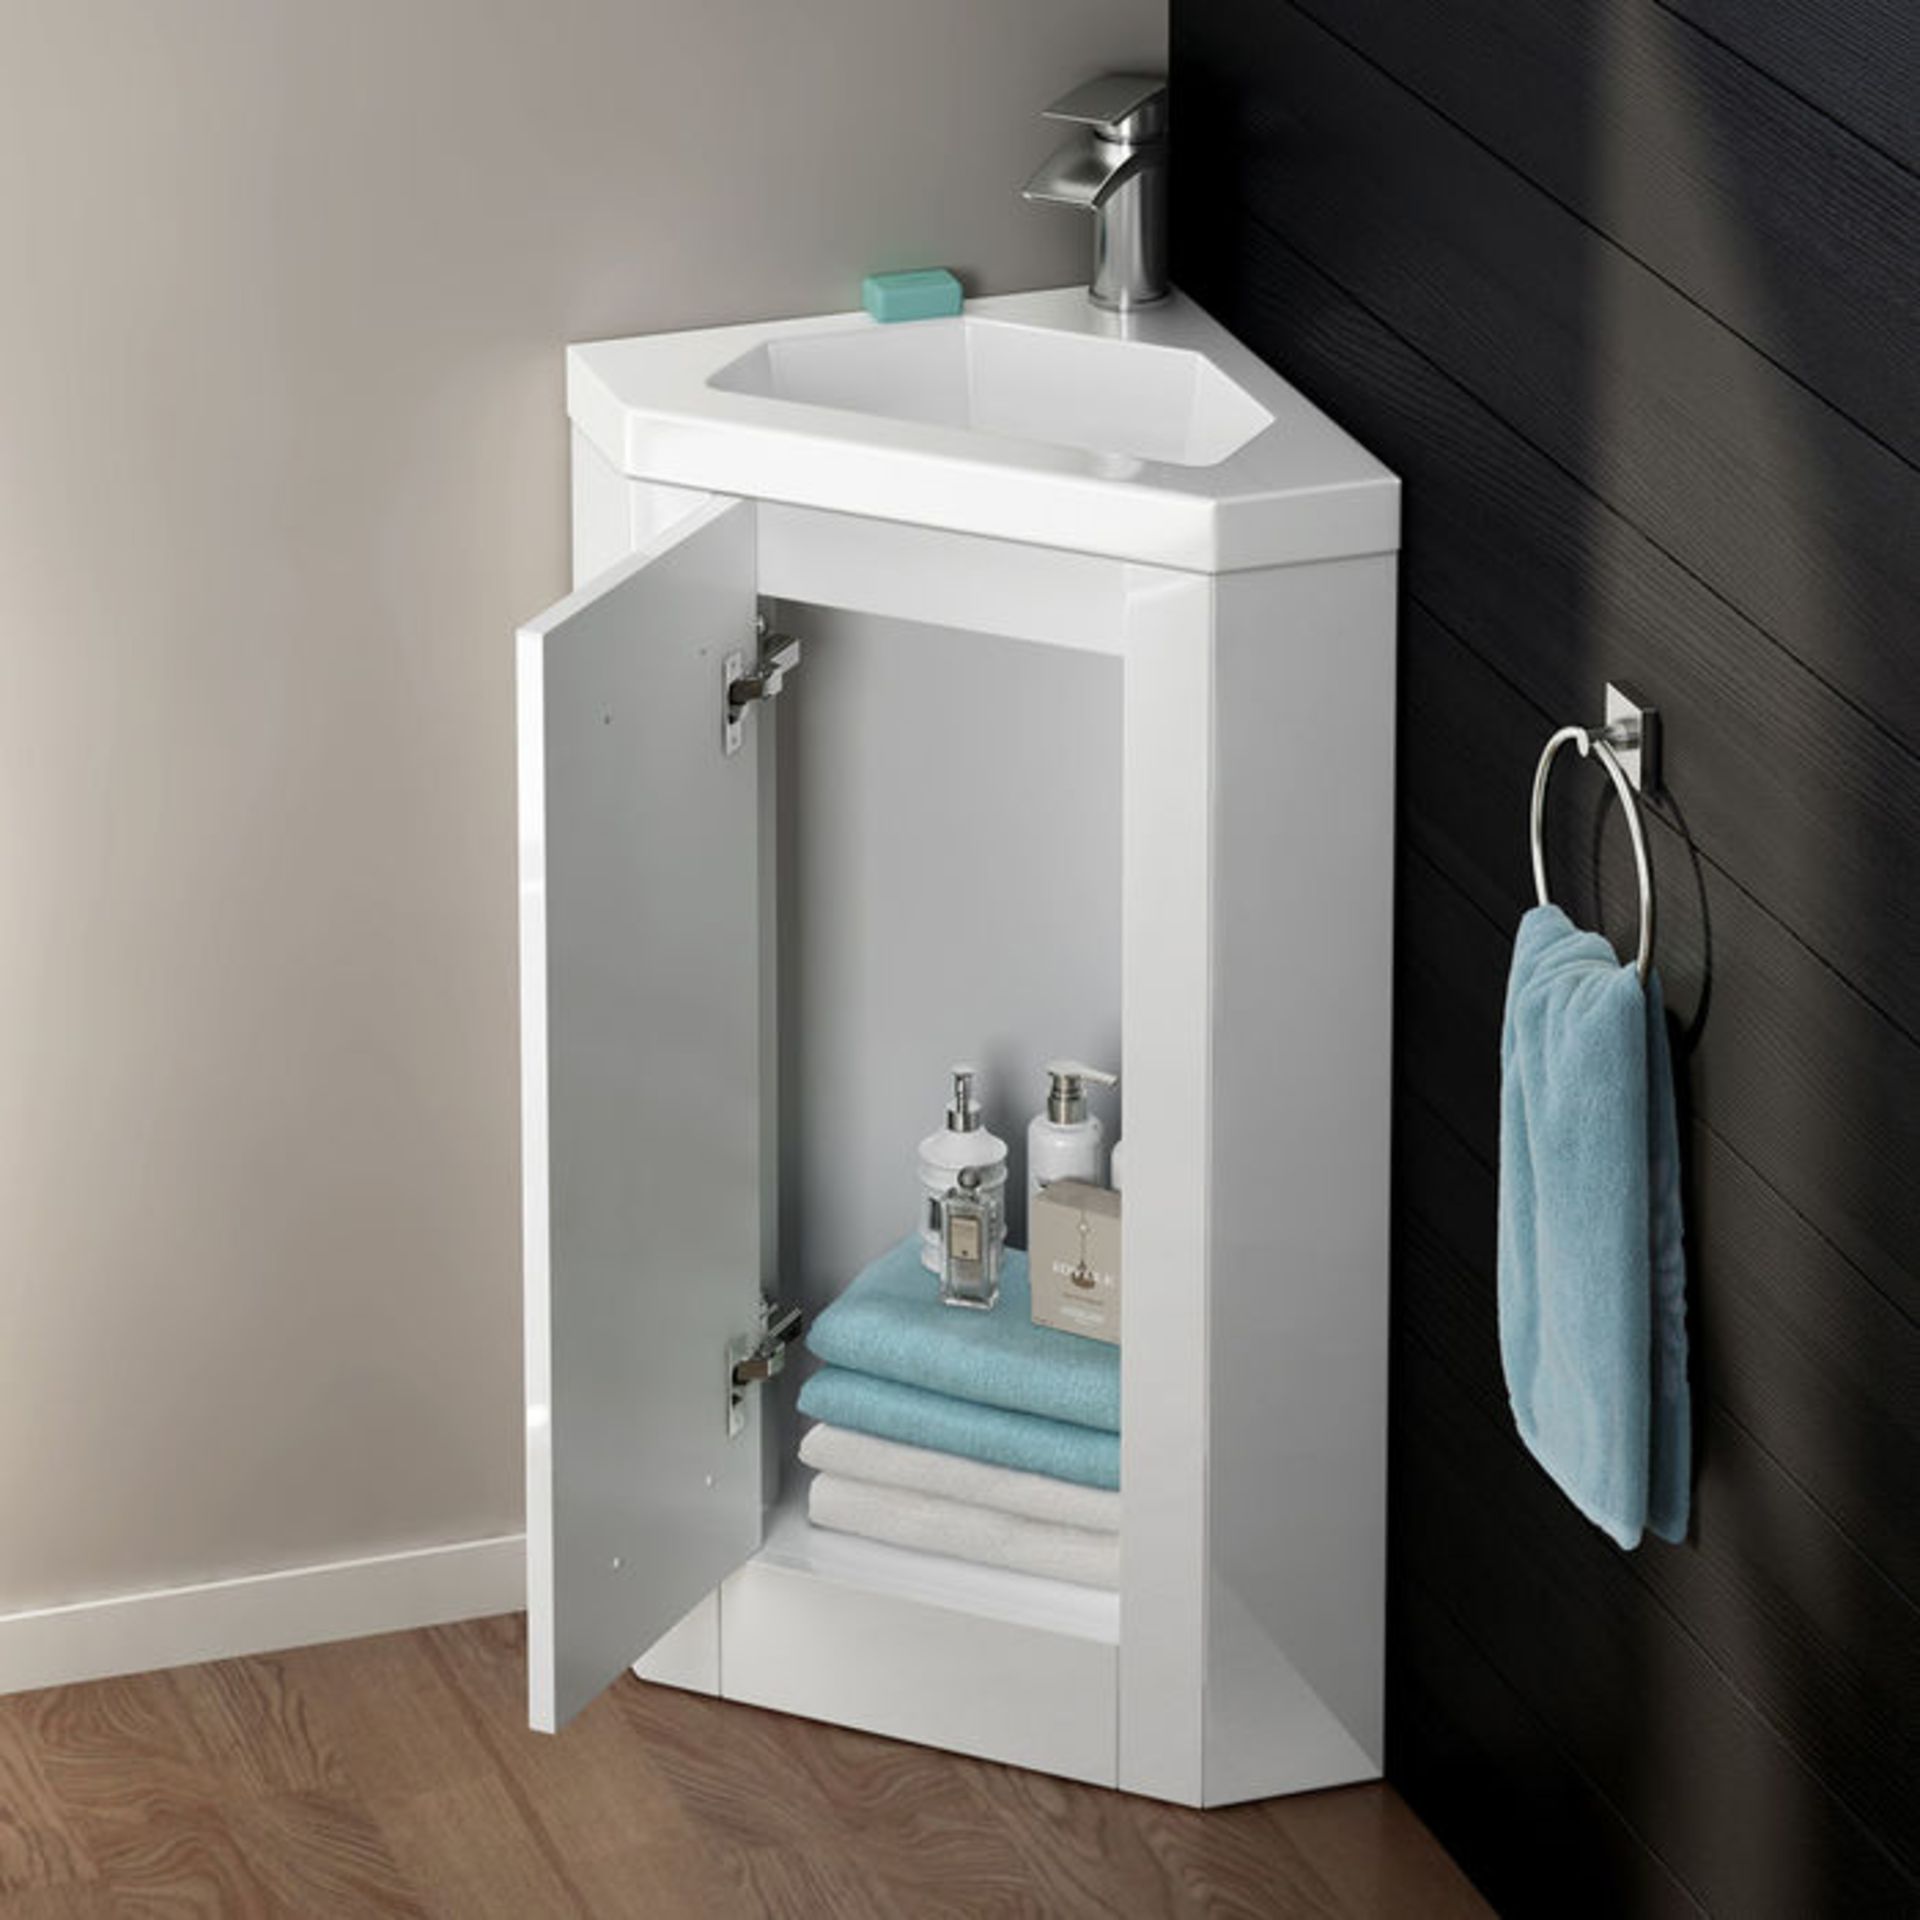 (XM40) 800mmx560mm Trent Corner Basin Cabinet. RRP £299.99. Comes complete with basin. Convenient, - Image 2 of 3